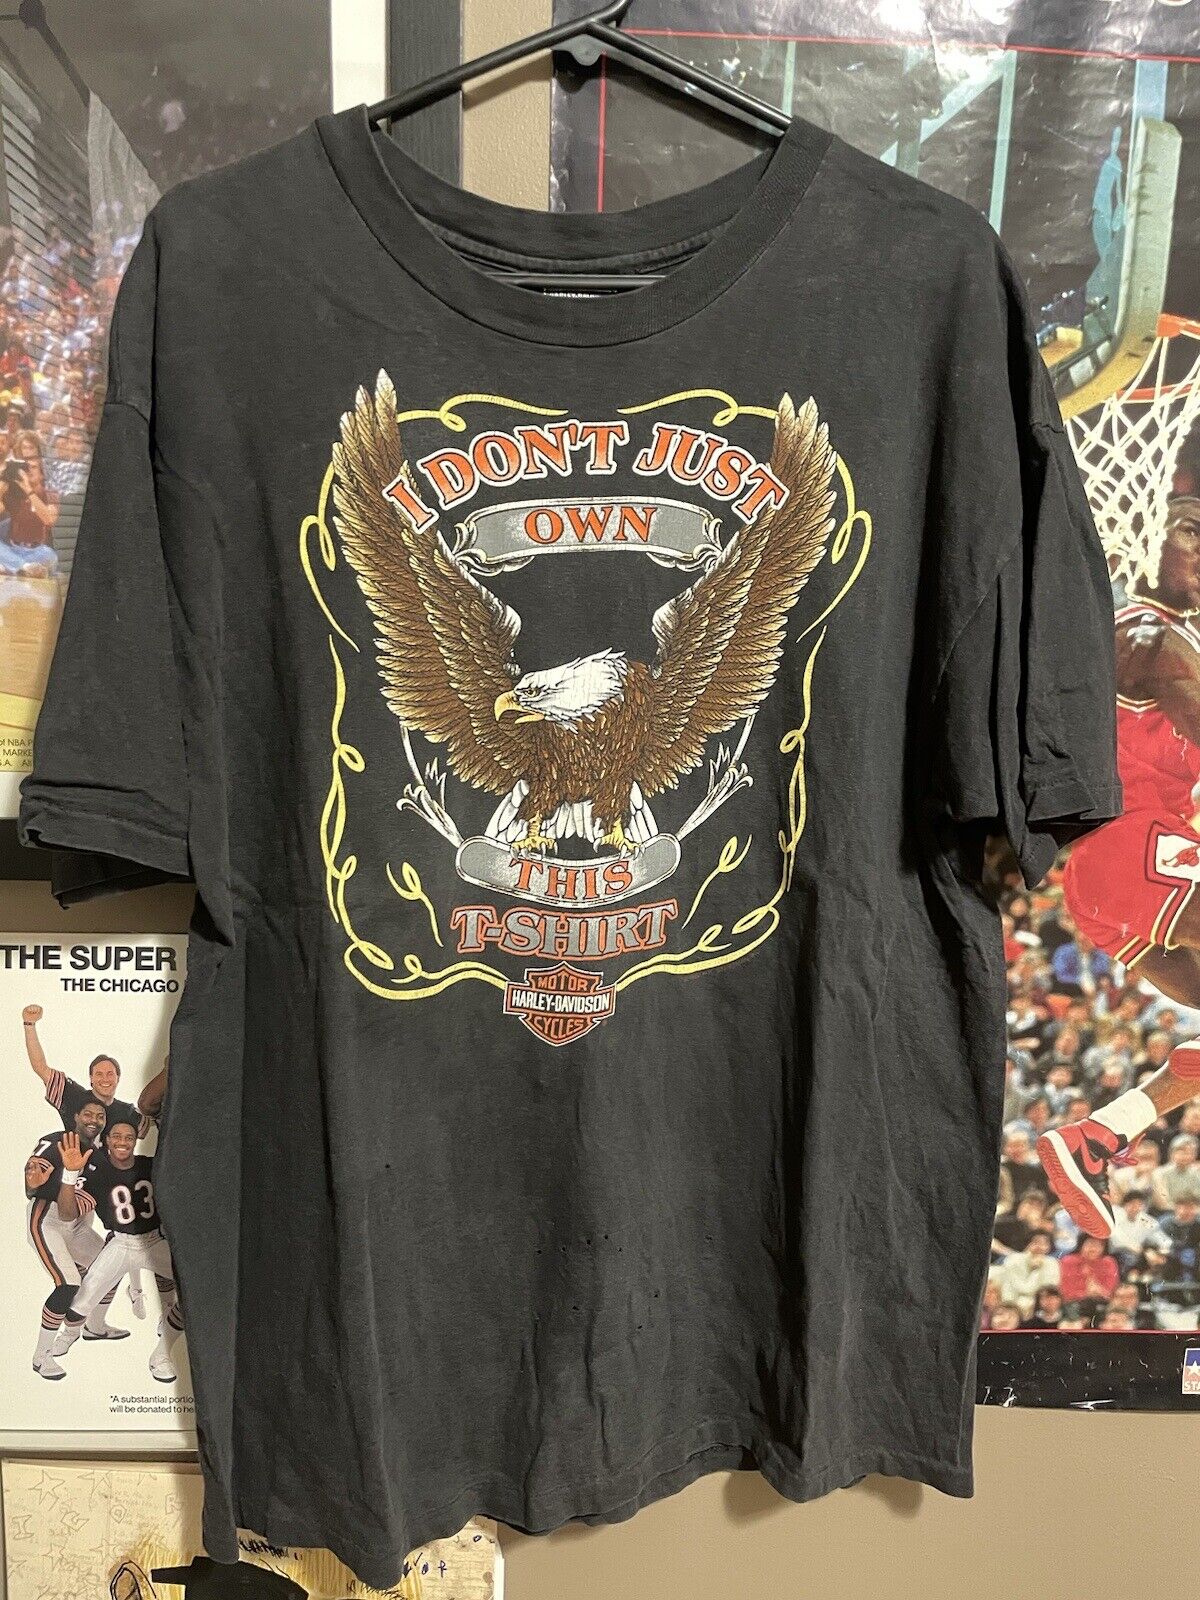 Vintage 90’s Harley Davidson Shirt I DONT JUST OWN THIS (Size XL) MT. Vernon IL